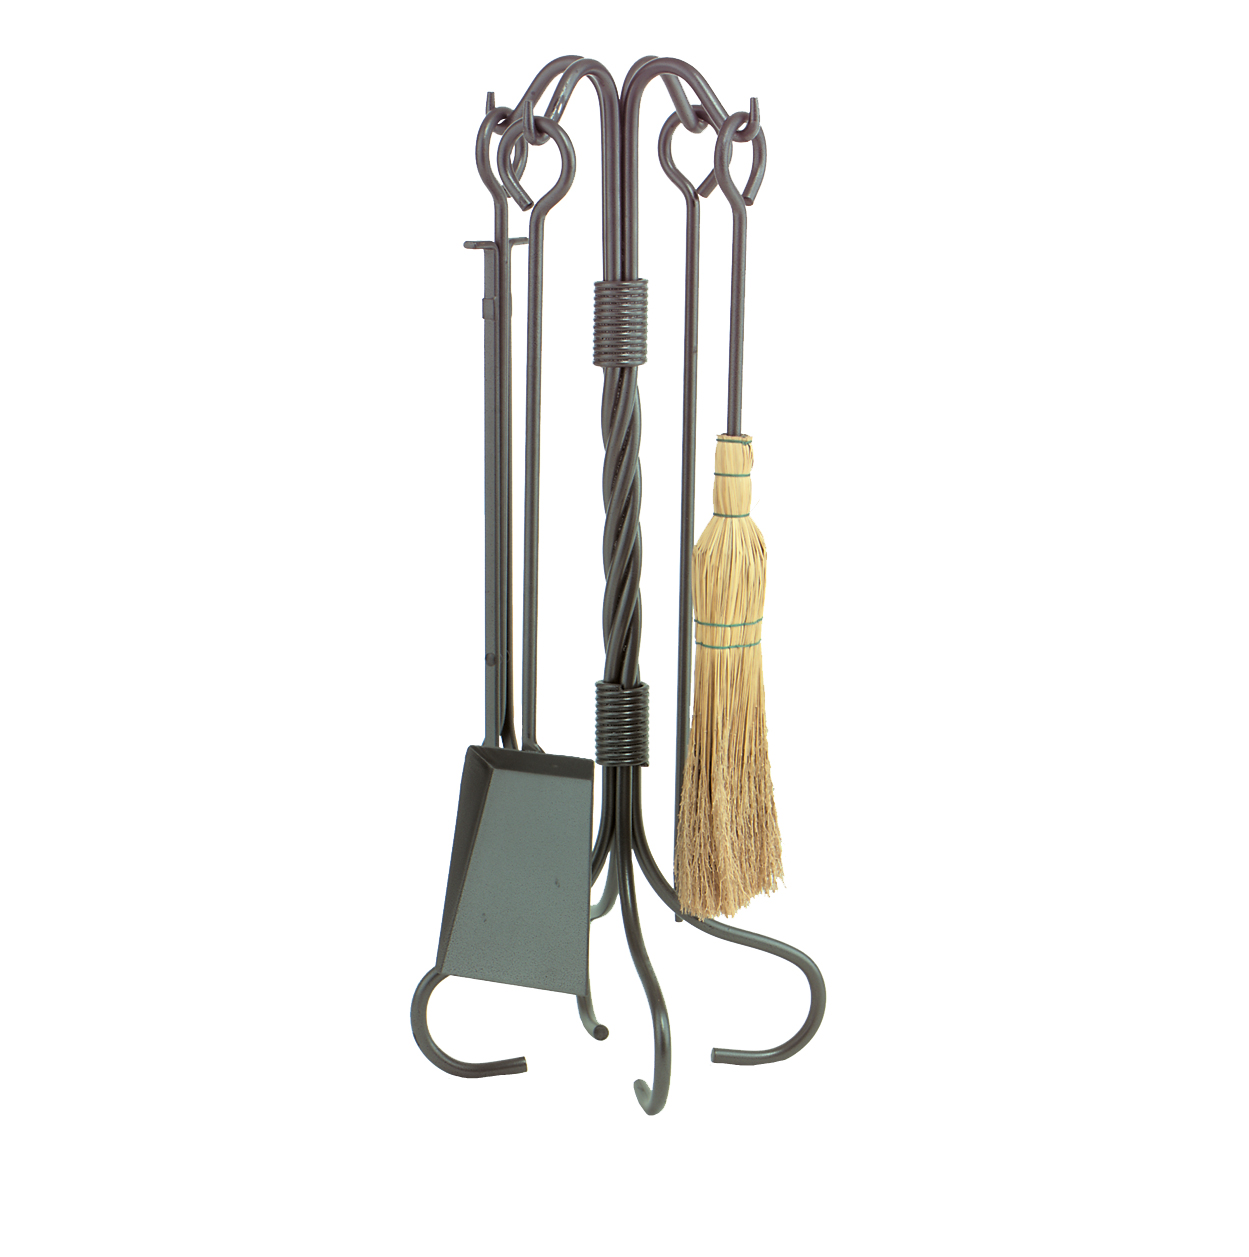 5 piece twist natural wrought iron fireset product image